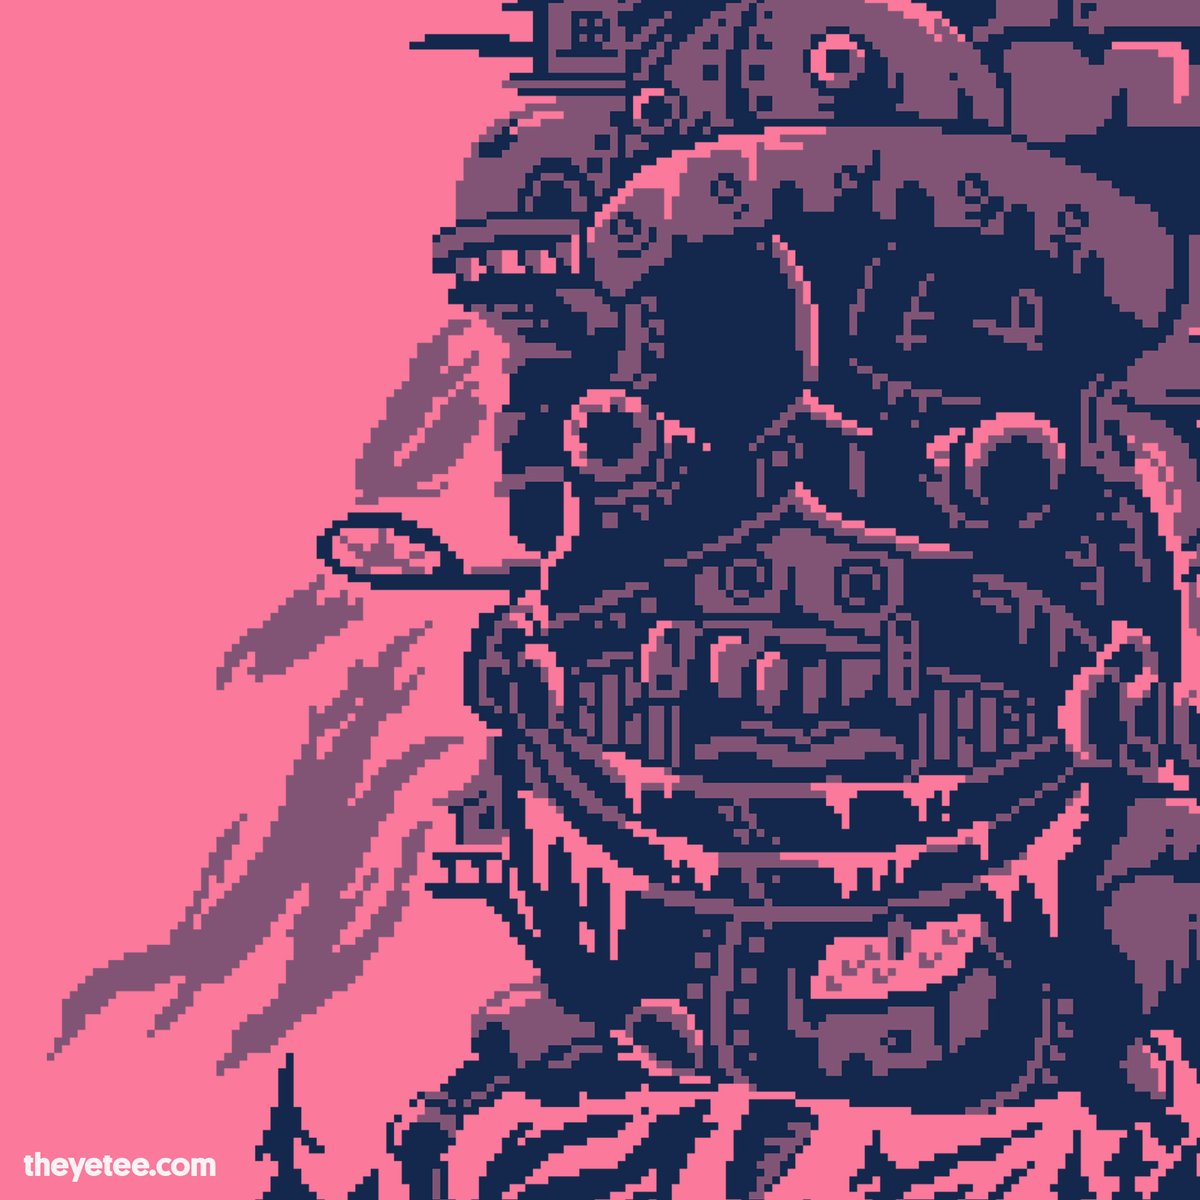 「Mobile home… #sneakpeek #dailytees 」|The Yetee 🌈のイラスト